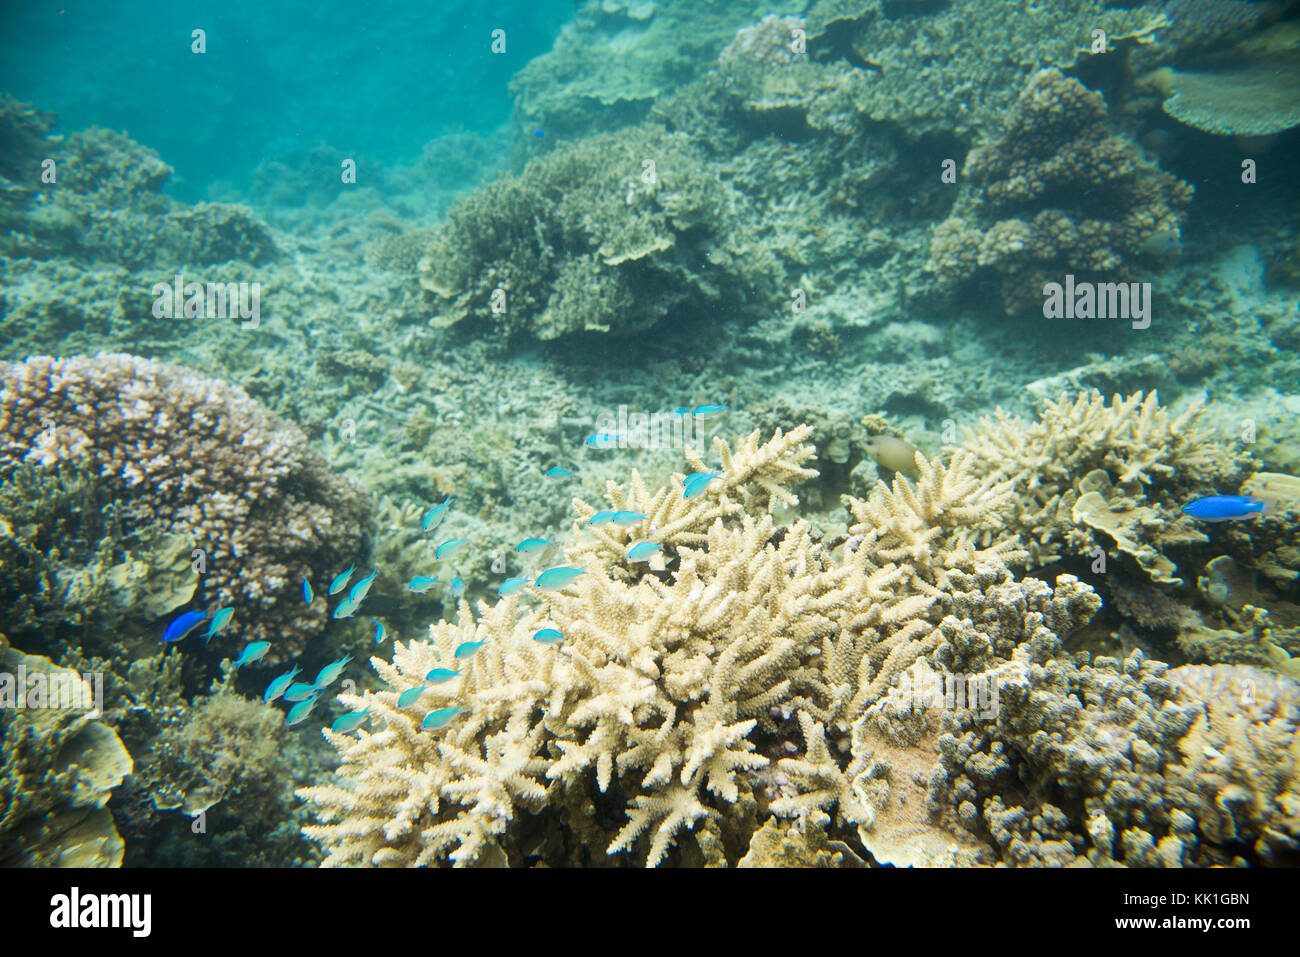 Green chromis, blue devil damselfish and angelfish in the Great Astrolabe Reef in the Pacific Ocean waters off the coast of Dravuni Island, Fiji Stock Photo